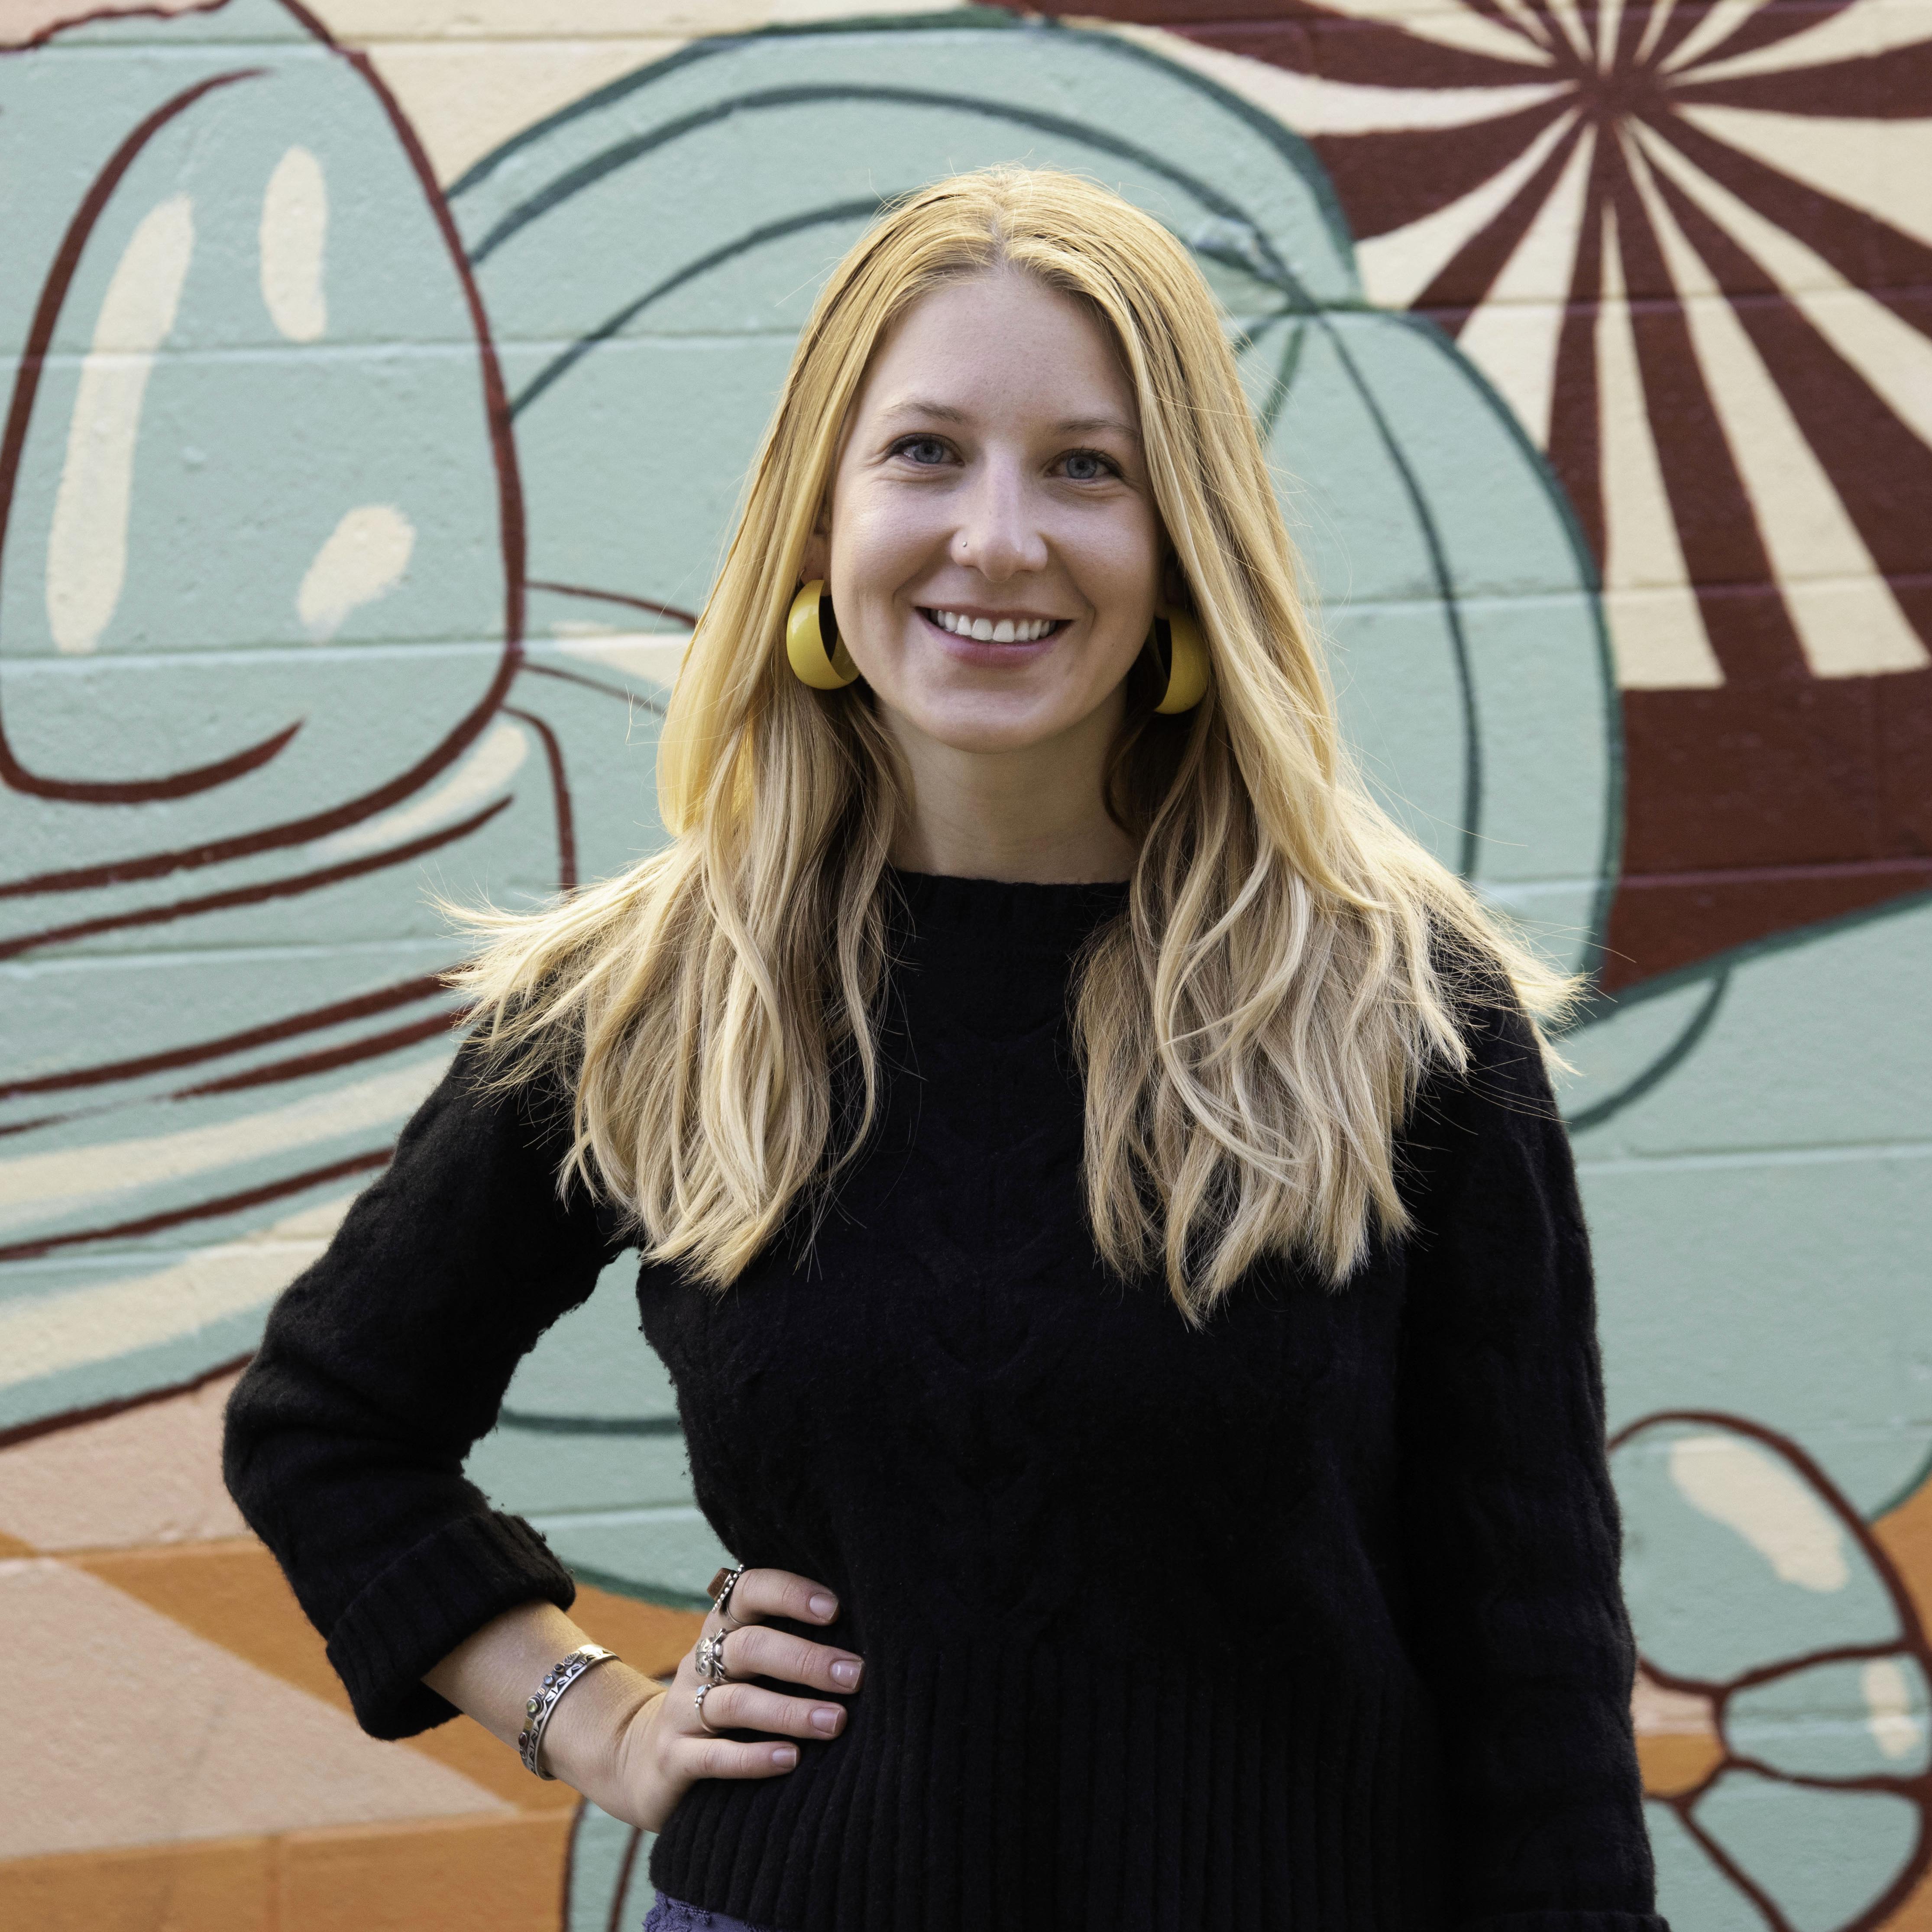 Image of Emma in front of an abstract mural. She has a black shirt and blue pants/skirts. She has blonde hair and yellow earrings. Her right hand is on her hip. 